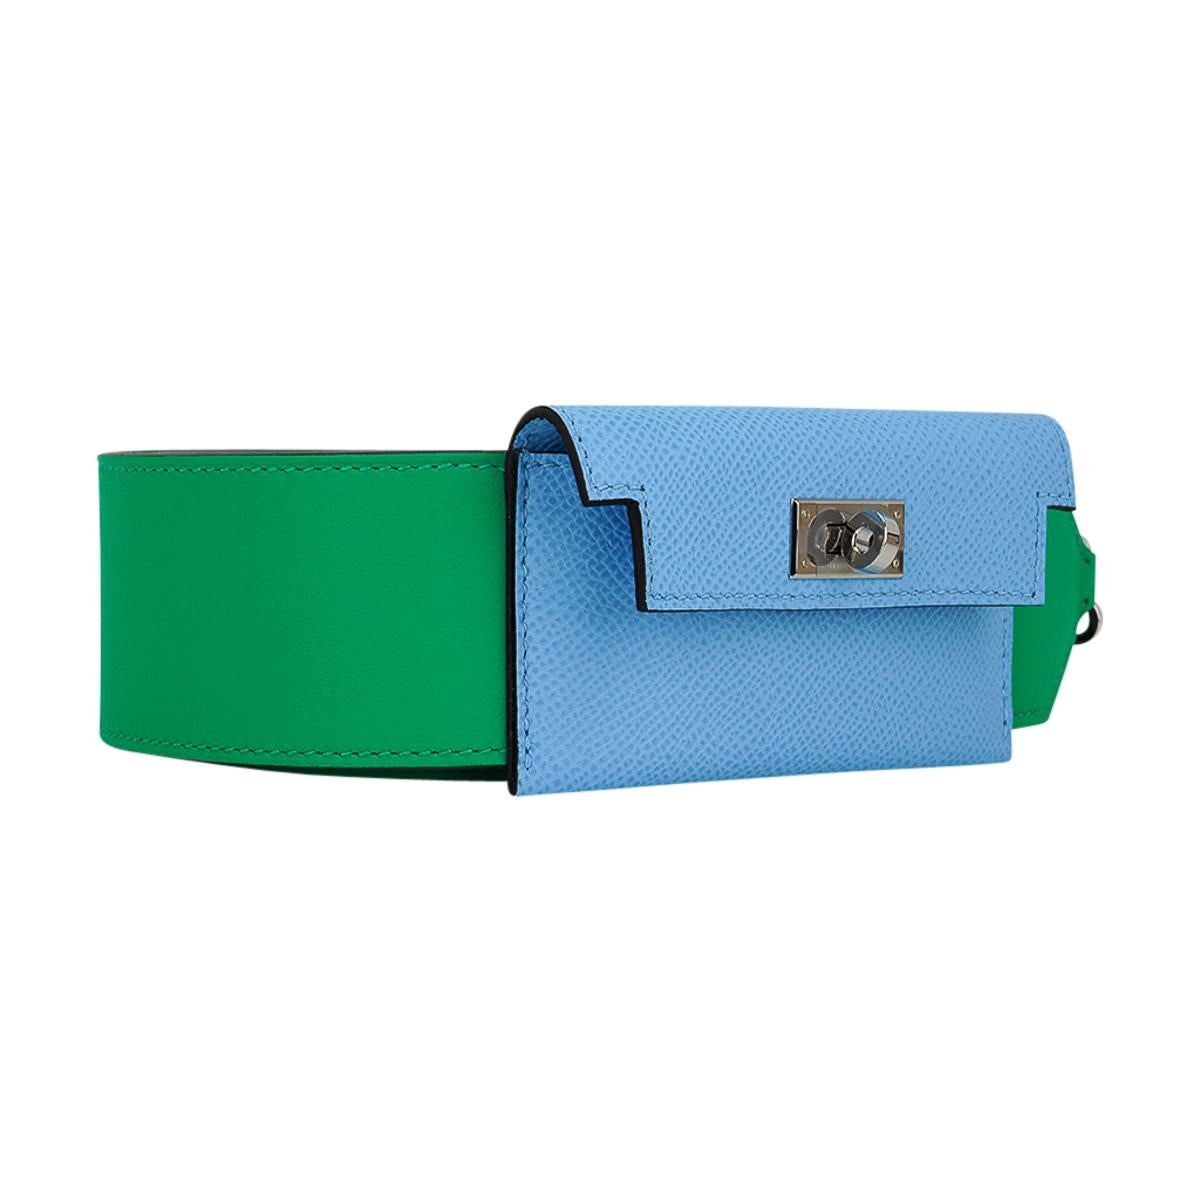 Mightychic offers an Hermes Kelly Pocket Bag Strap featured in Menthe and Blue Celeste.
The wide belt strap has a card holder with a Kelly turn key clasp.
Palladium hardware. 
The Menthe strap is Swift leather and the Blue Celeste card case is Epsom